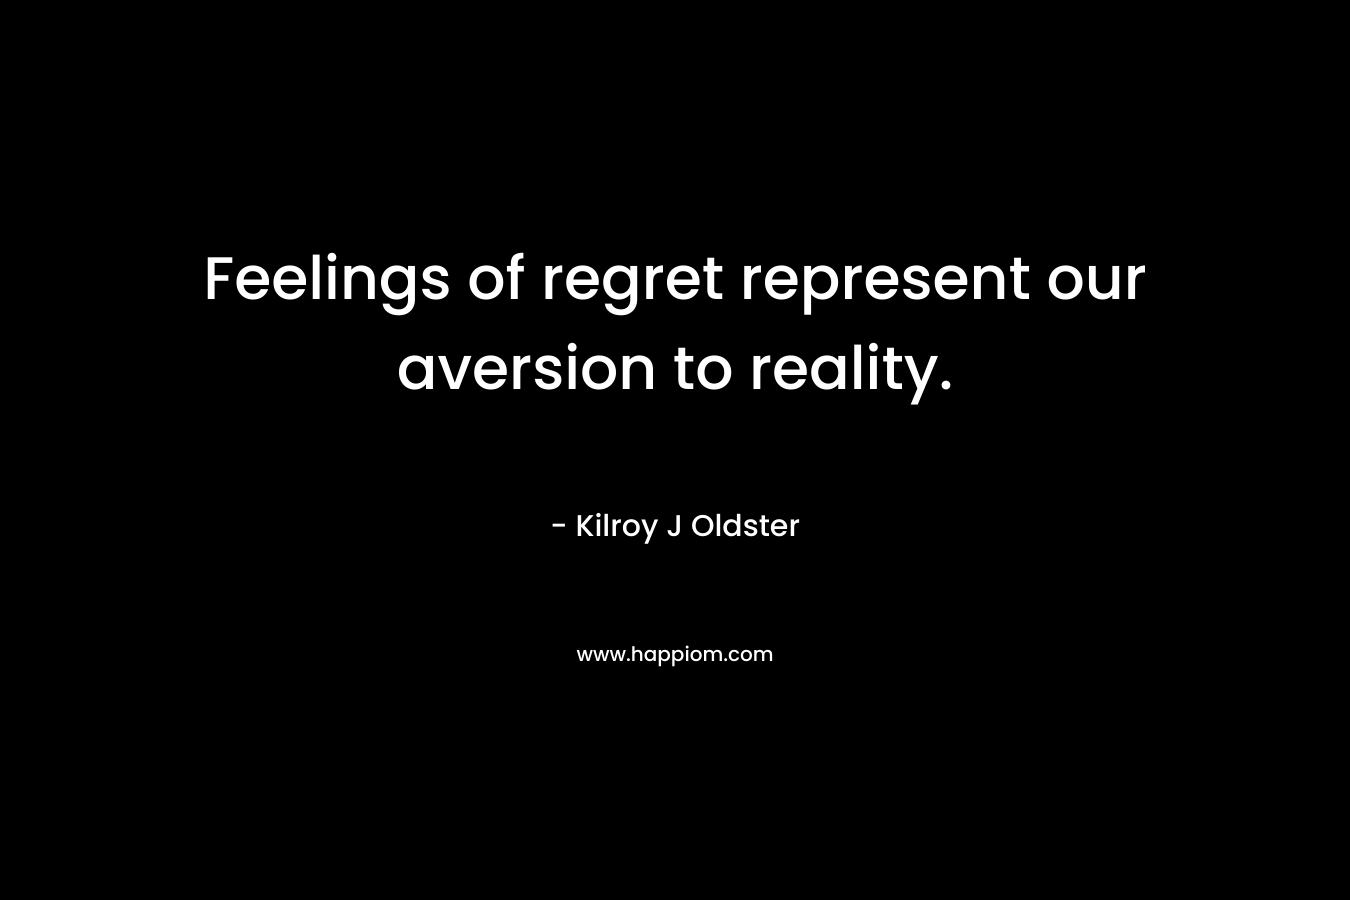 Feelings of regret represent our aversion to reality. – Kilroy J Oldster